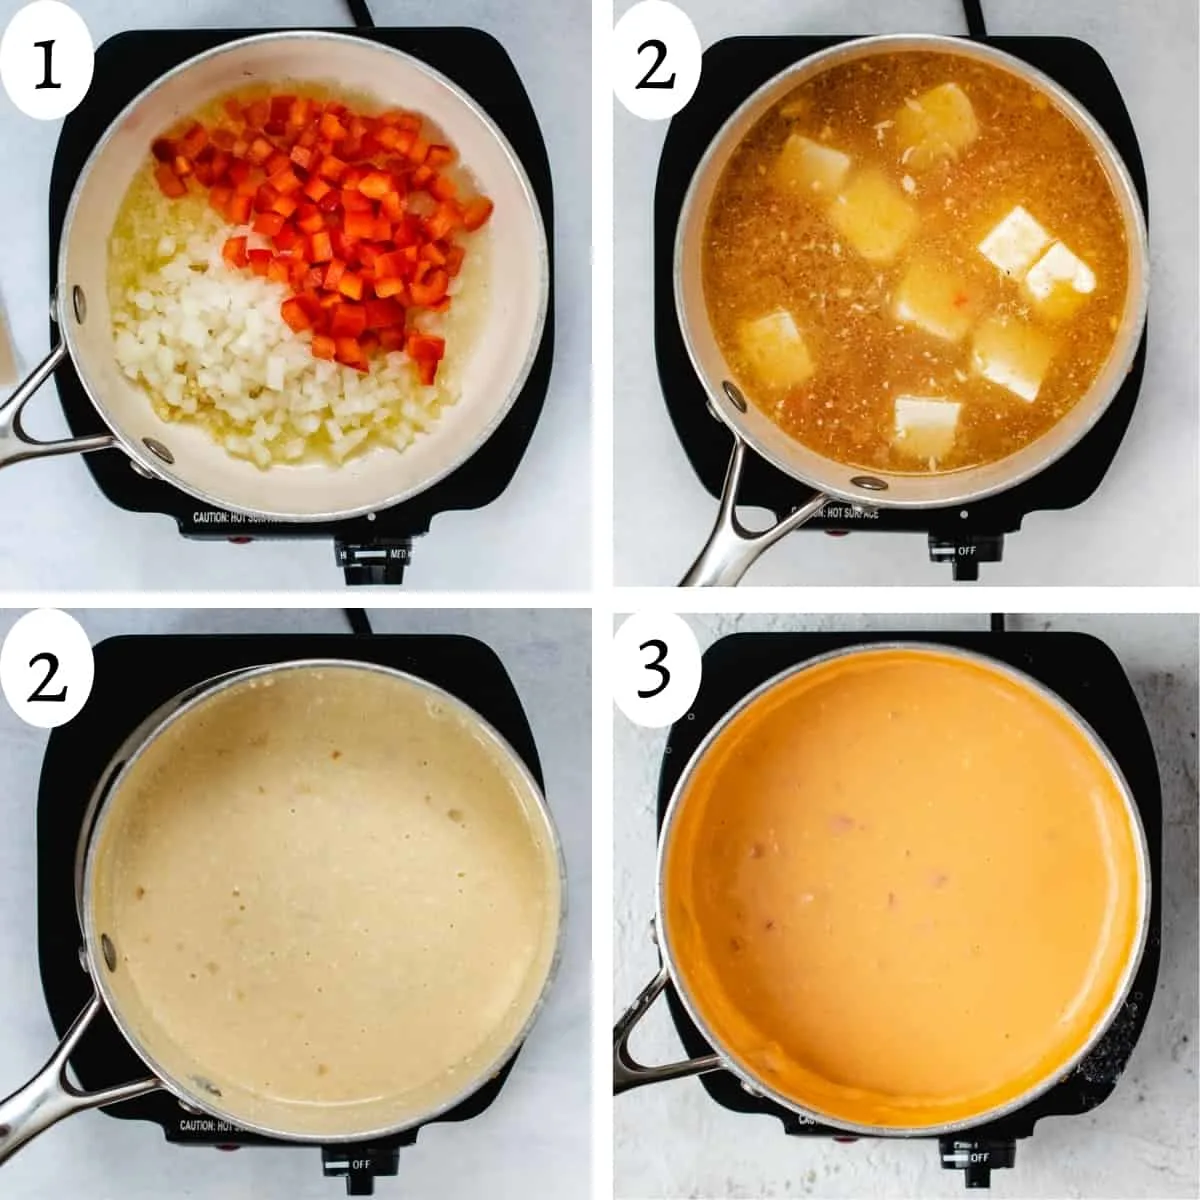 Step by step images for how to make homemade beer cheese.